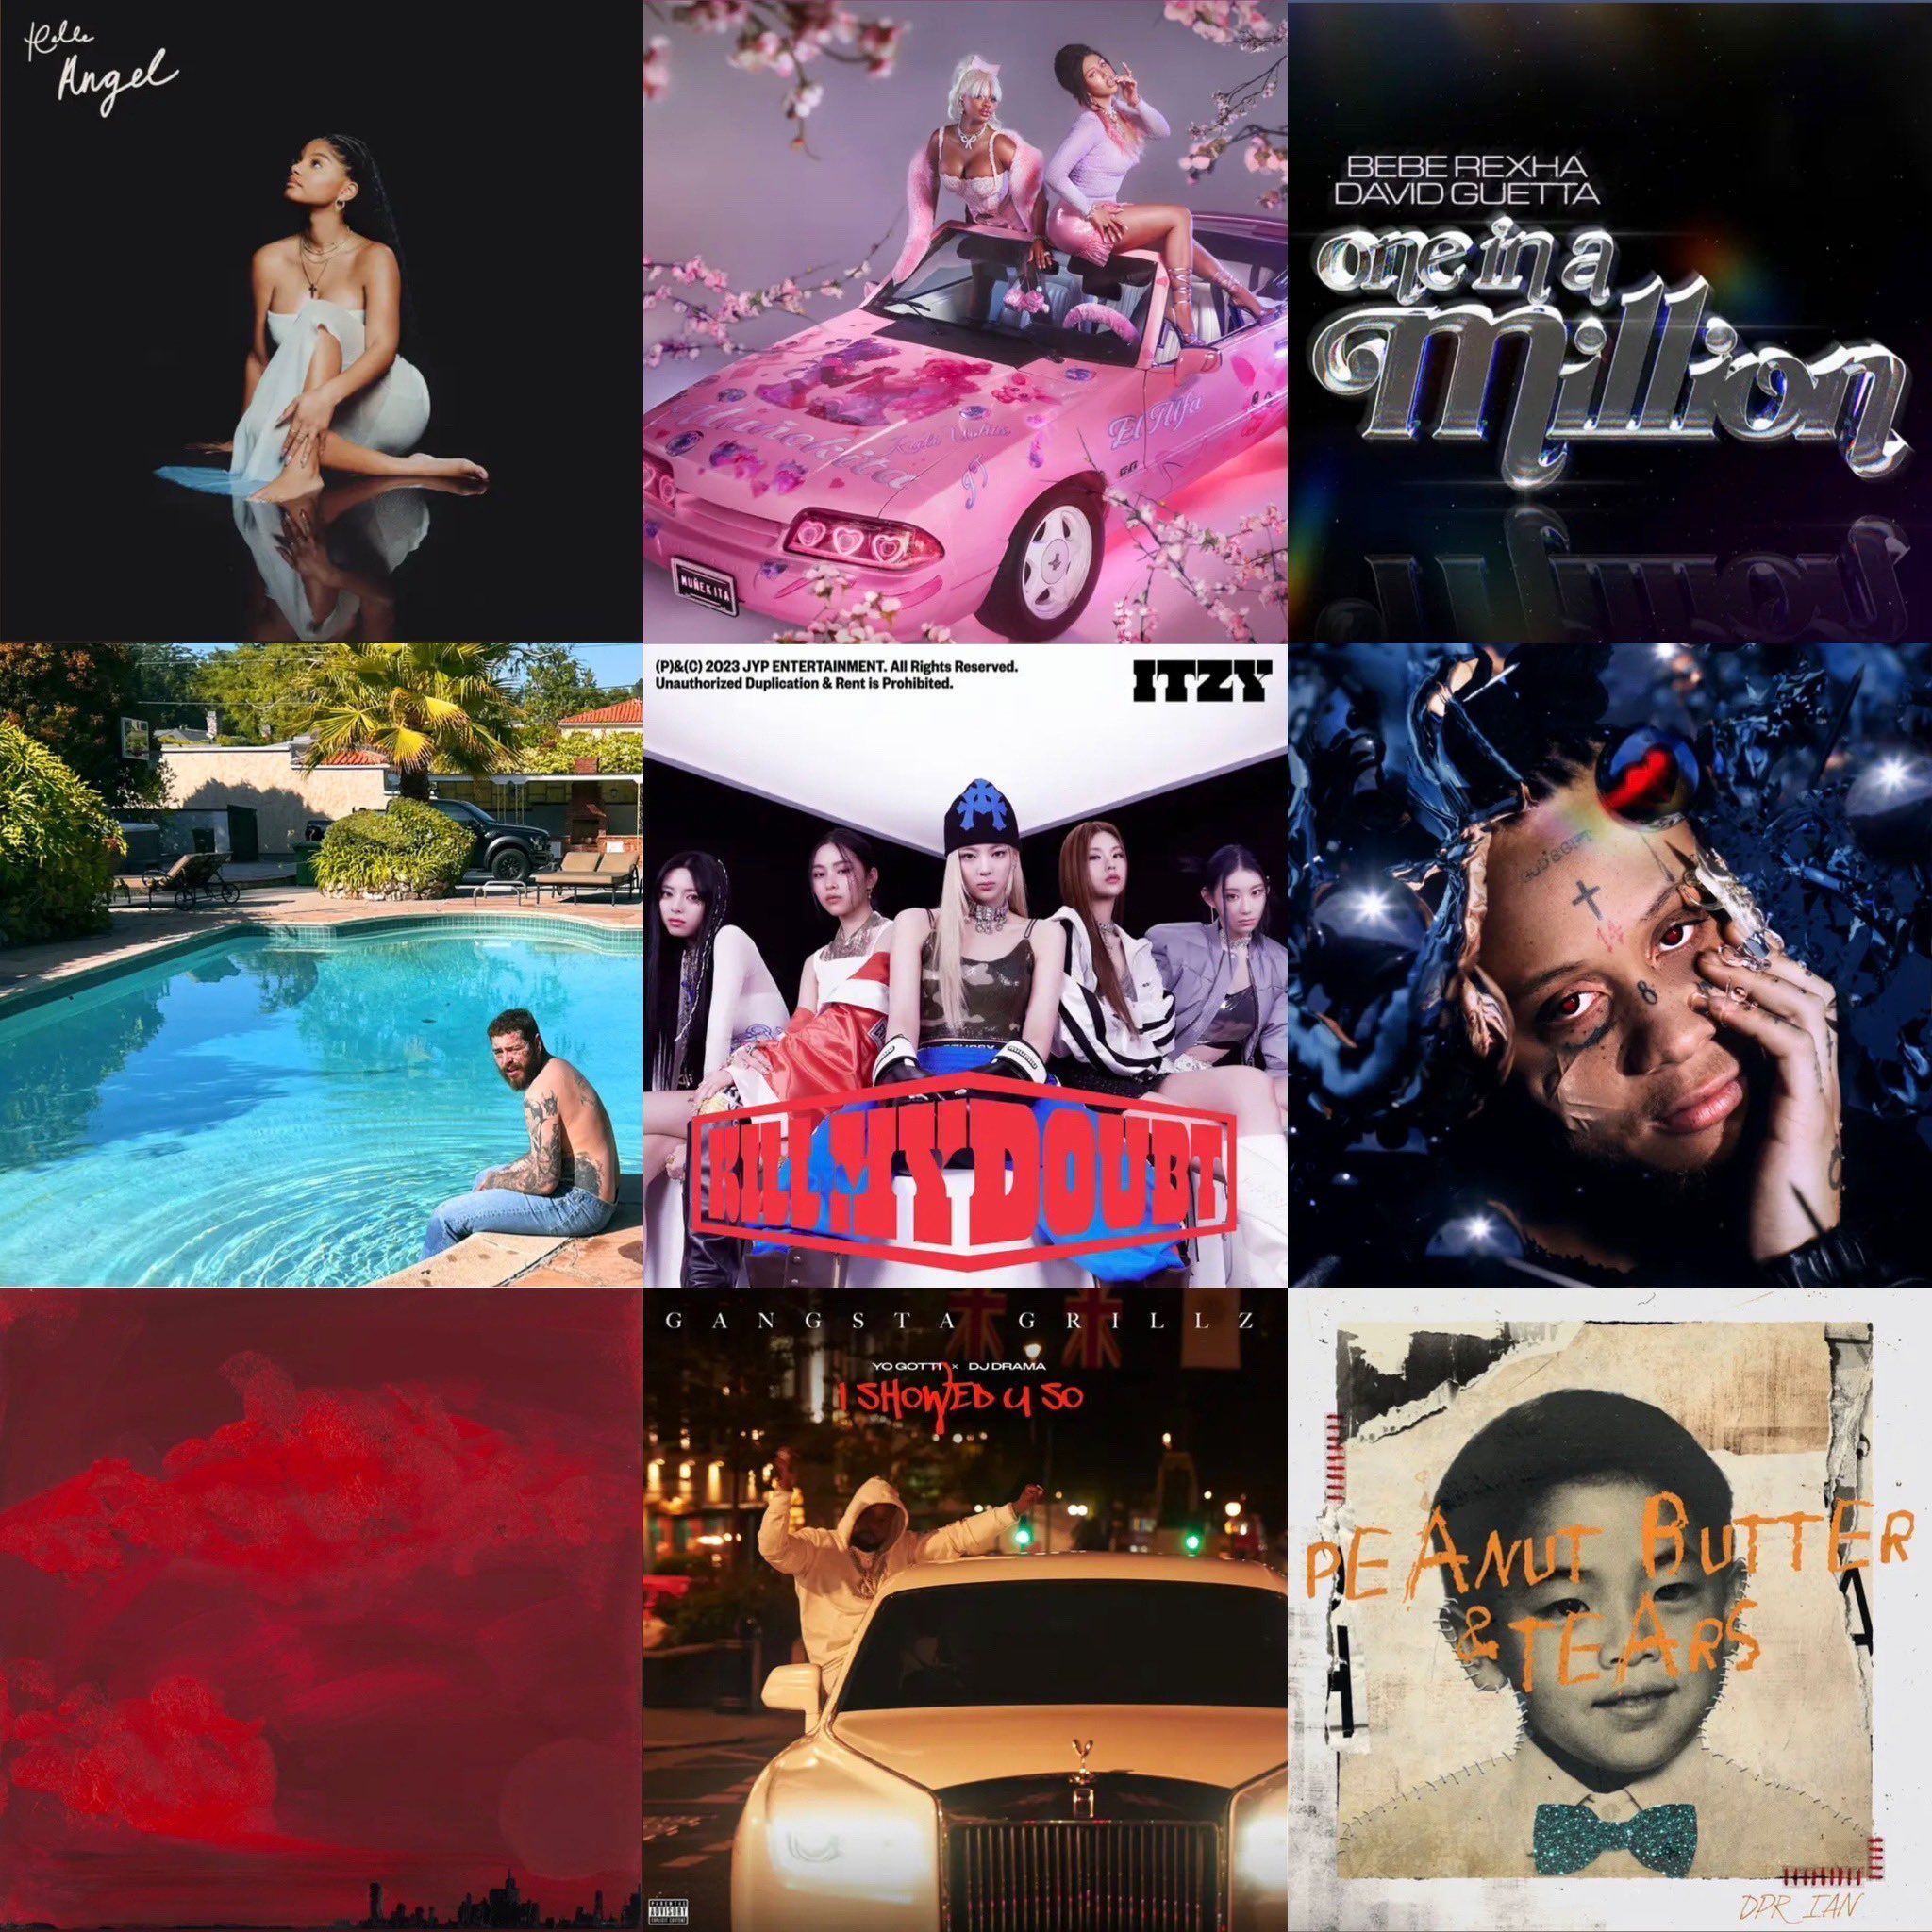 Are you streaming any of these new releases? #NewMusicFriday Halle Bailey Kali Uchis x El Alfa x JT of City Girls Bebe Rexha x David Guetta Post Malone (Bonus)